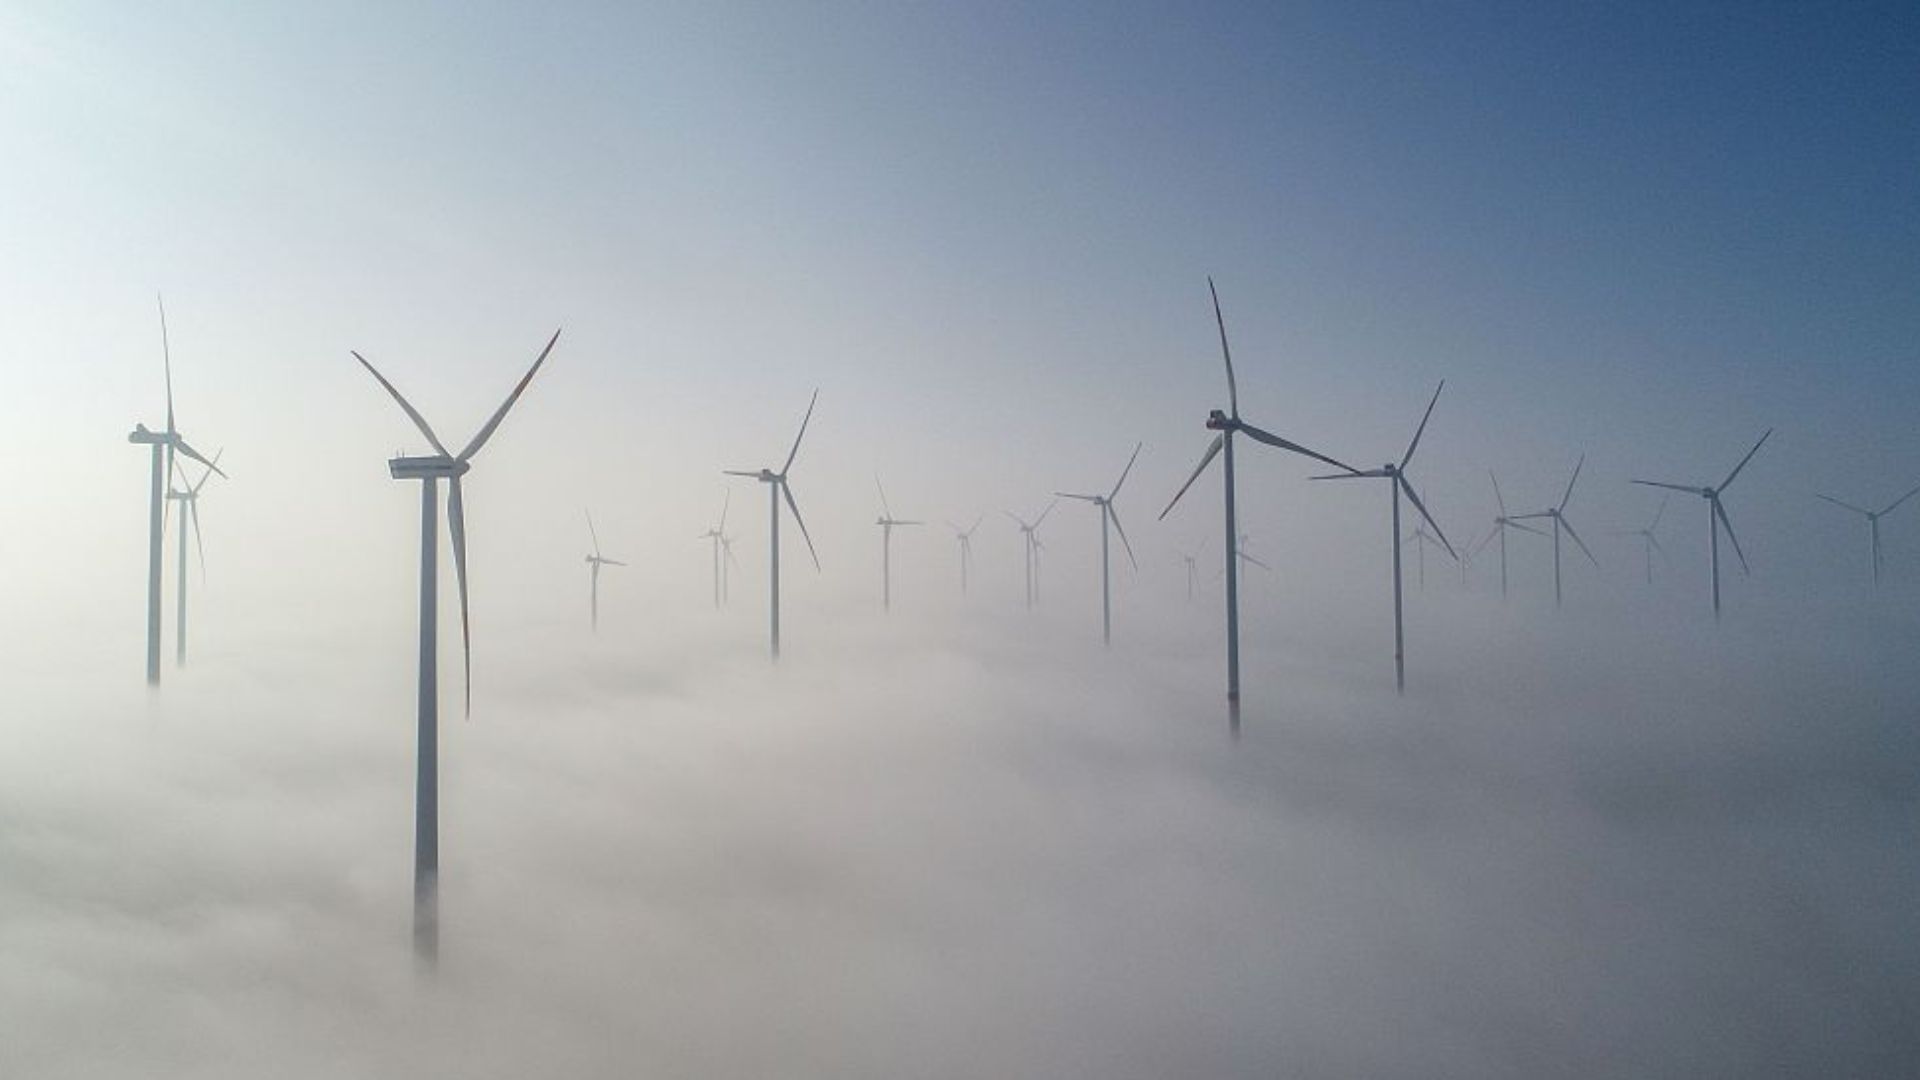 The future of wind power generated at plants like this one in Jacobsdorf remain foggy. /Patrick Pleulclose/dpa